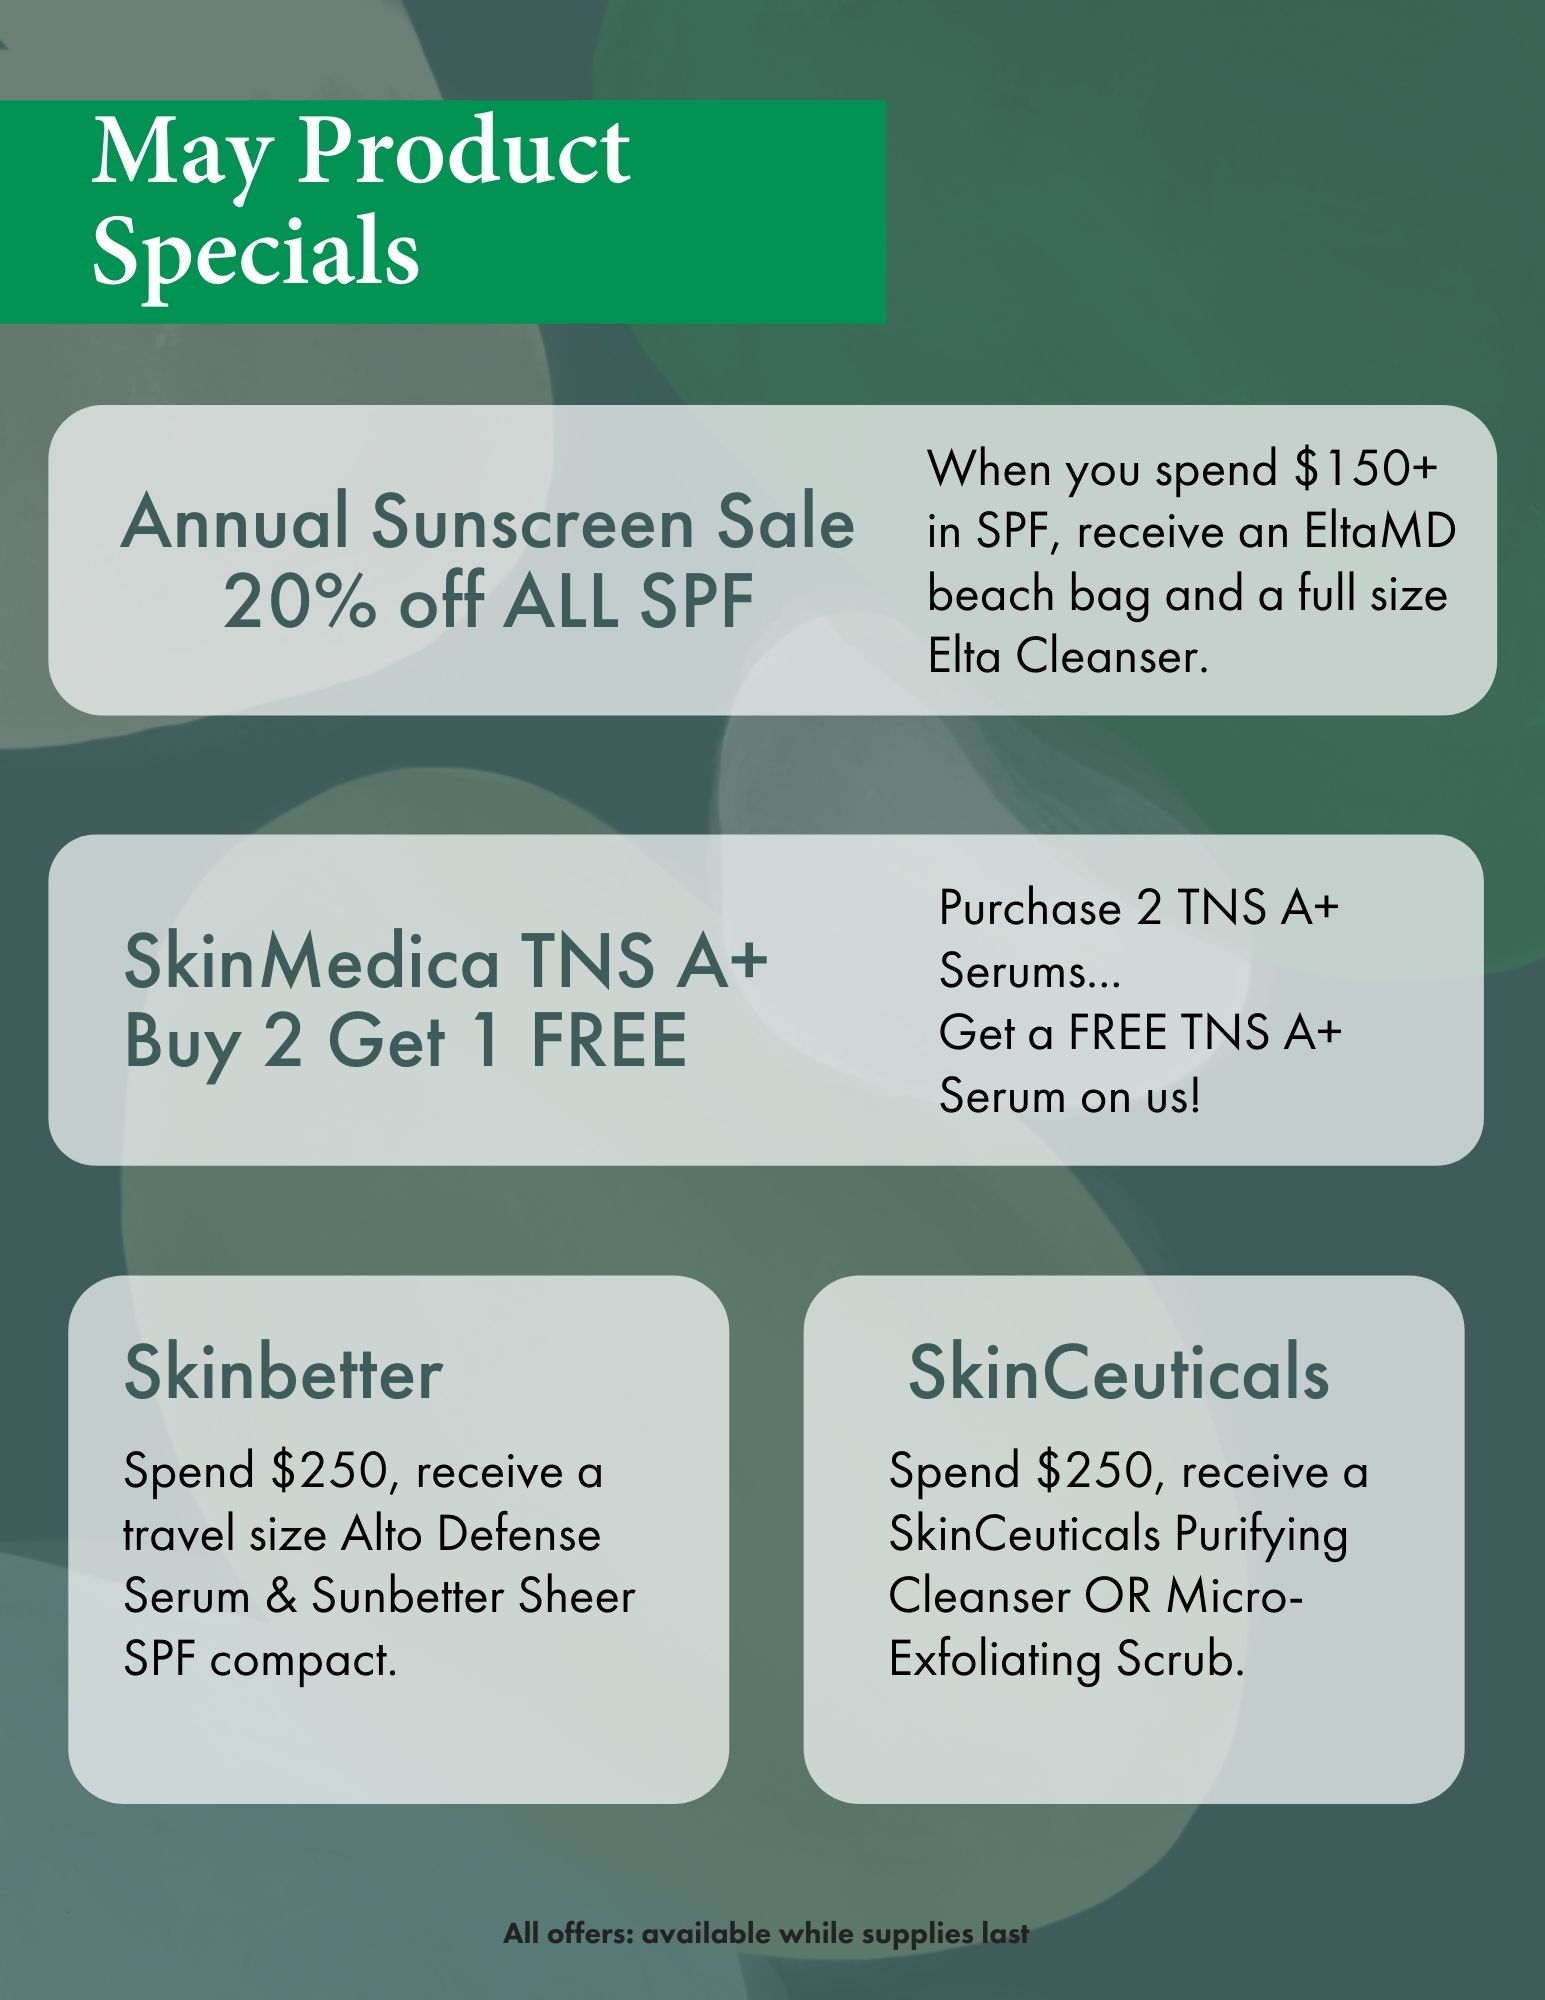 May Product Specials